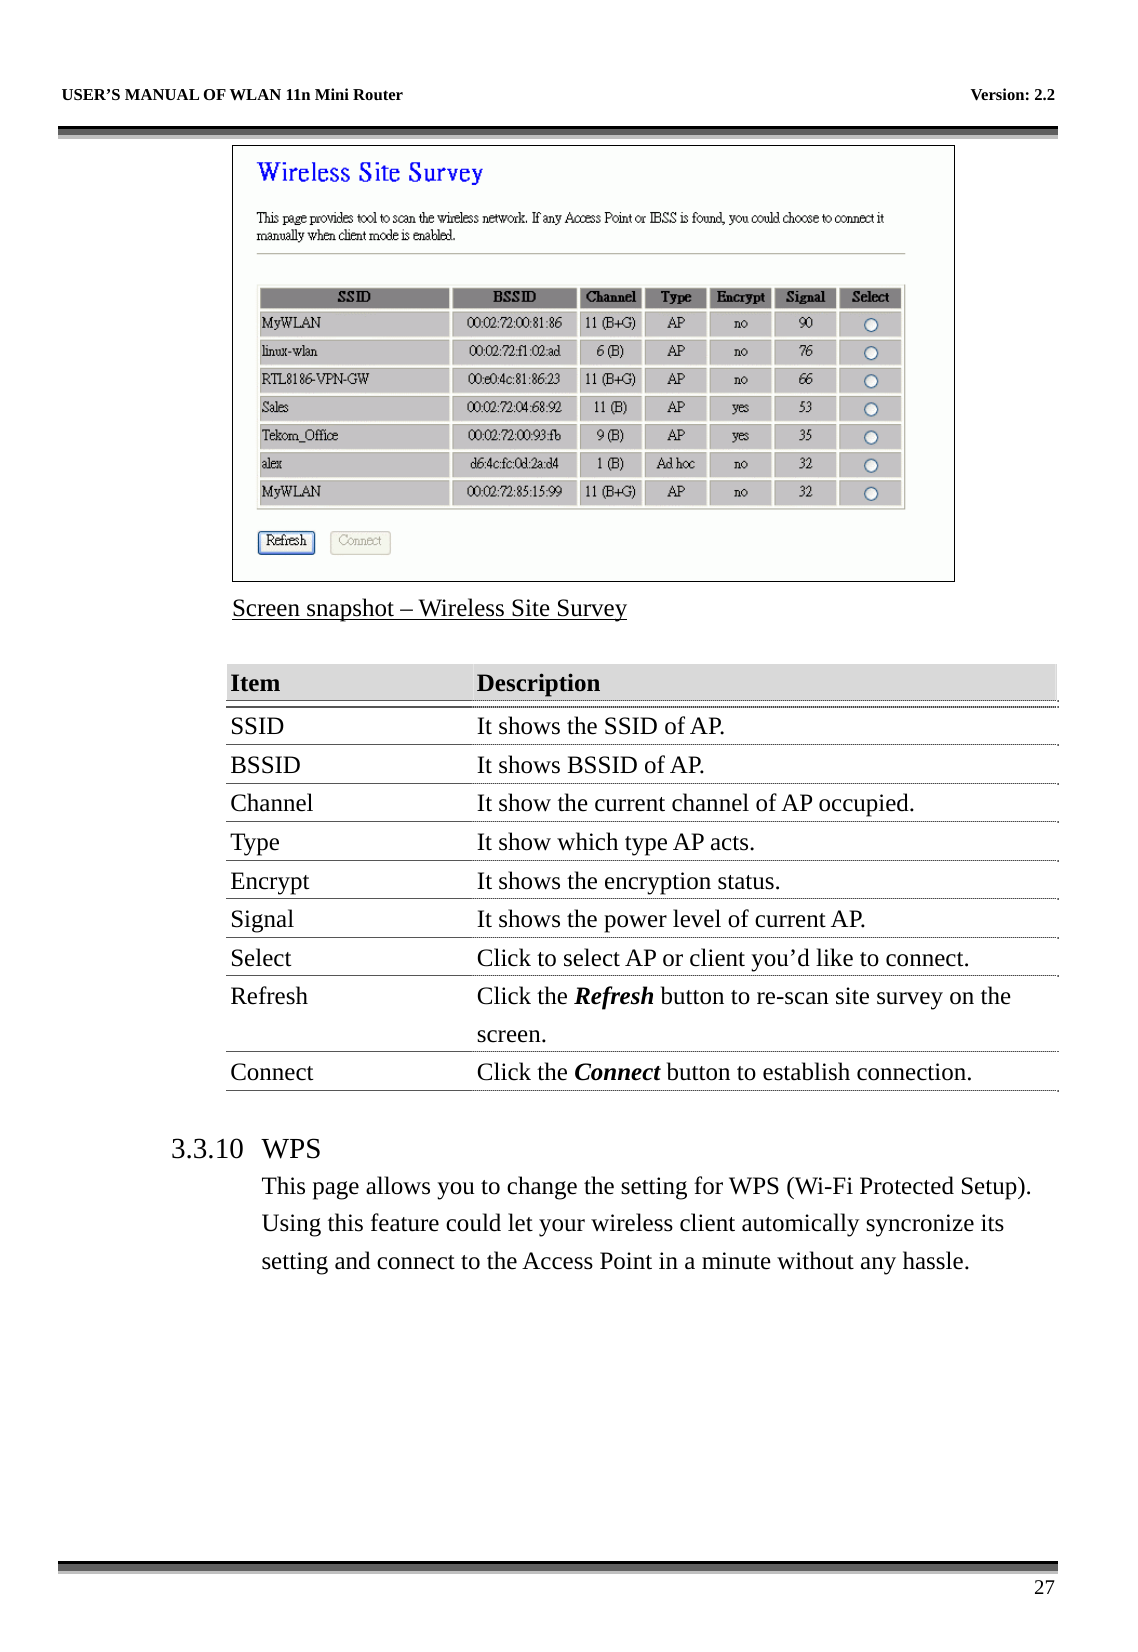   USER’S MANUAL OF WLAN 11n Mini Router    Version: 2.2      27  Screen snapshot – Wireless Site Survey  Item  Description   SSID  It shows the SSID of AP. BSSID  It shows BSSID of AP. Channel  It show the current channel of AP occupied. Type  It show which type AP acts. Encrypt  It shows the encryption status. Signal  It shows the power level of current AP. Select  Click to select AP or client you’d like to connect. Refresh Click the Refresh button to re-scan site survey on the screen. Connect Click the Connect button to establish connection.  3.3.10 WPS                 This page allows you to change the setting for WPS (Wi-Fi Protected Setup). Using this feature could let your wireless client automically syncronize its setting and connect to the Access Point in a minute without any hassle.   